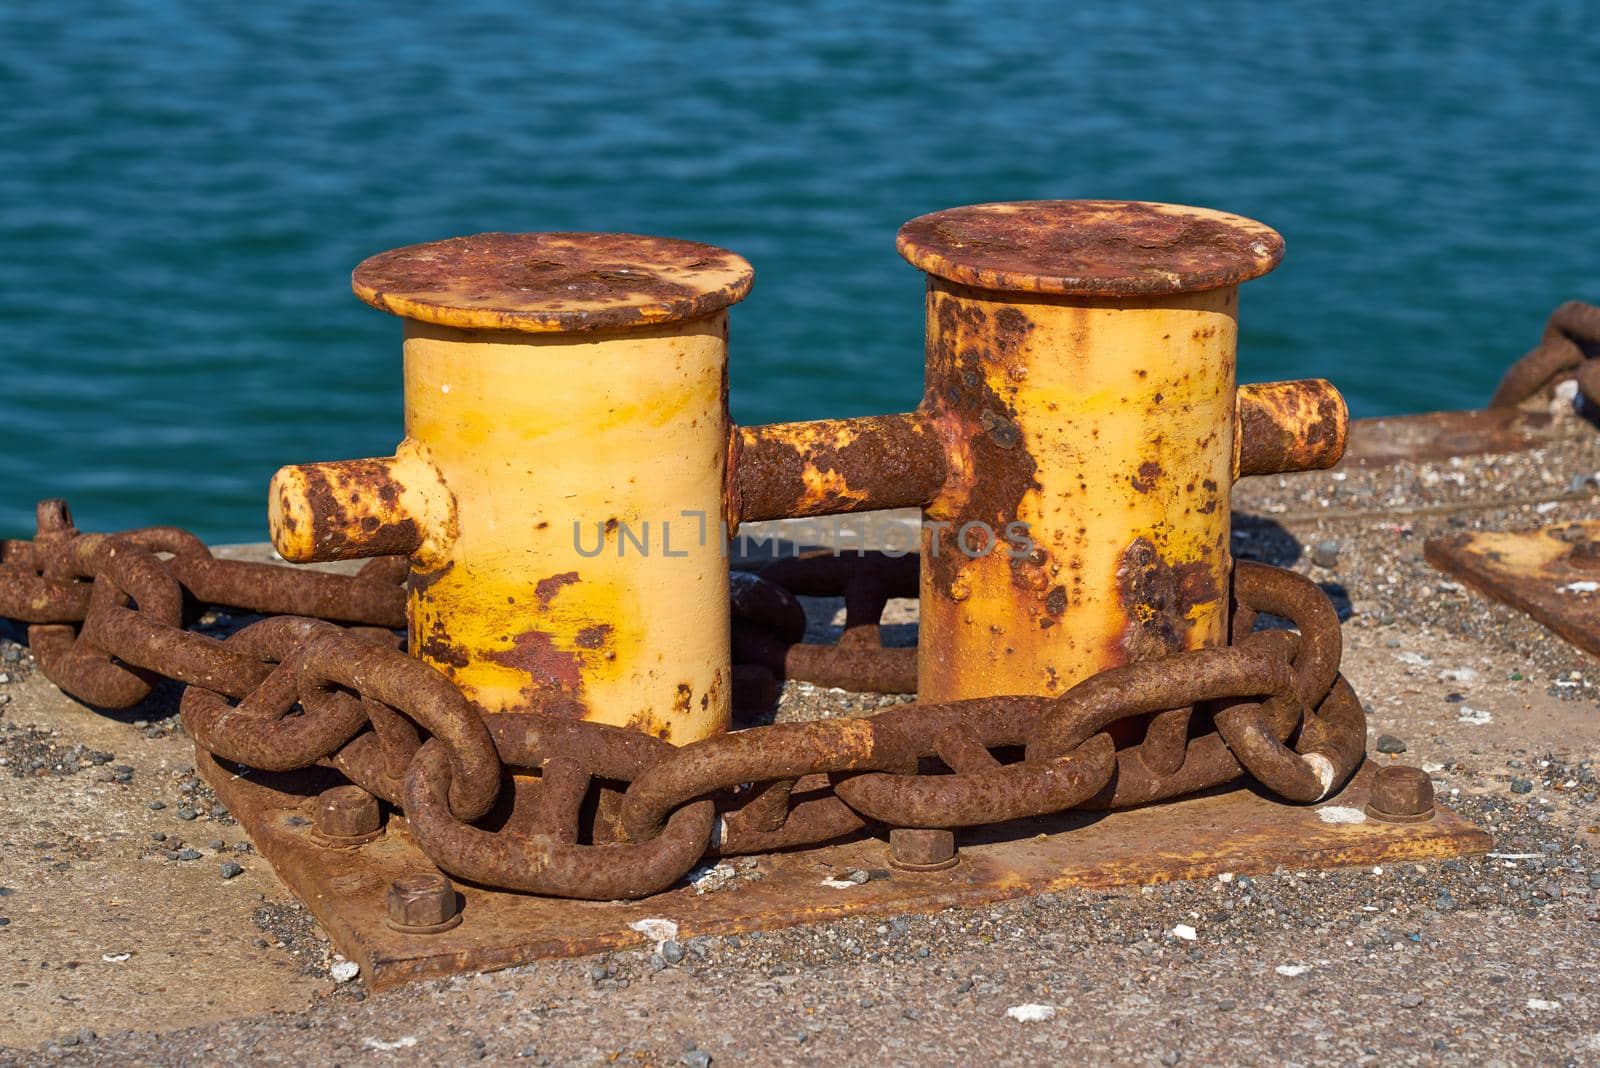 The rusty mooring bitt is used to anchor boats and ships to a port or harbour.